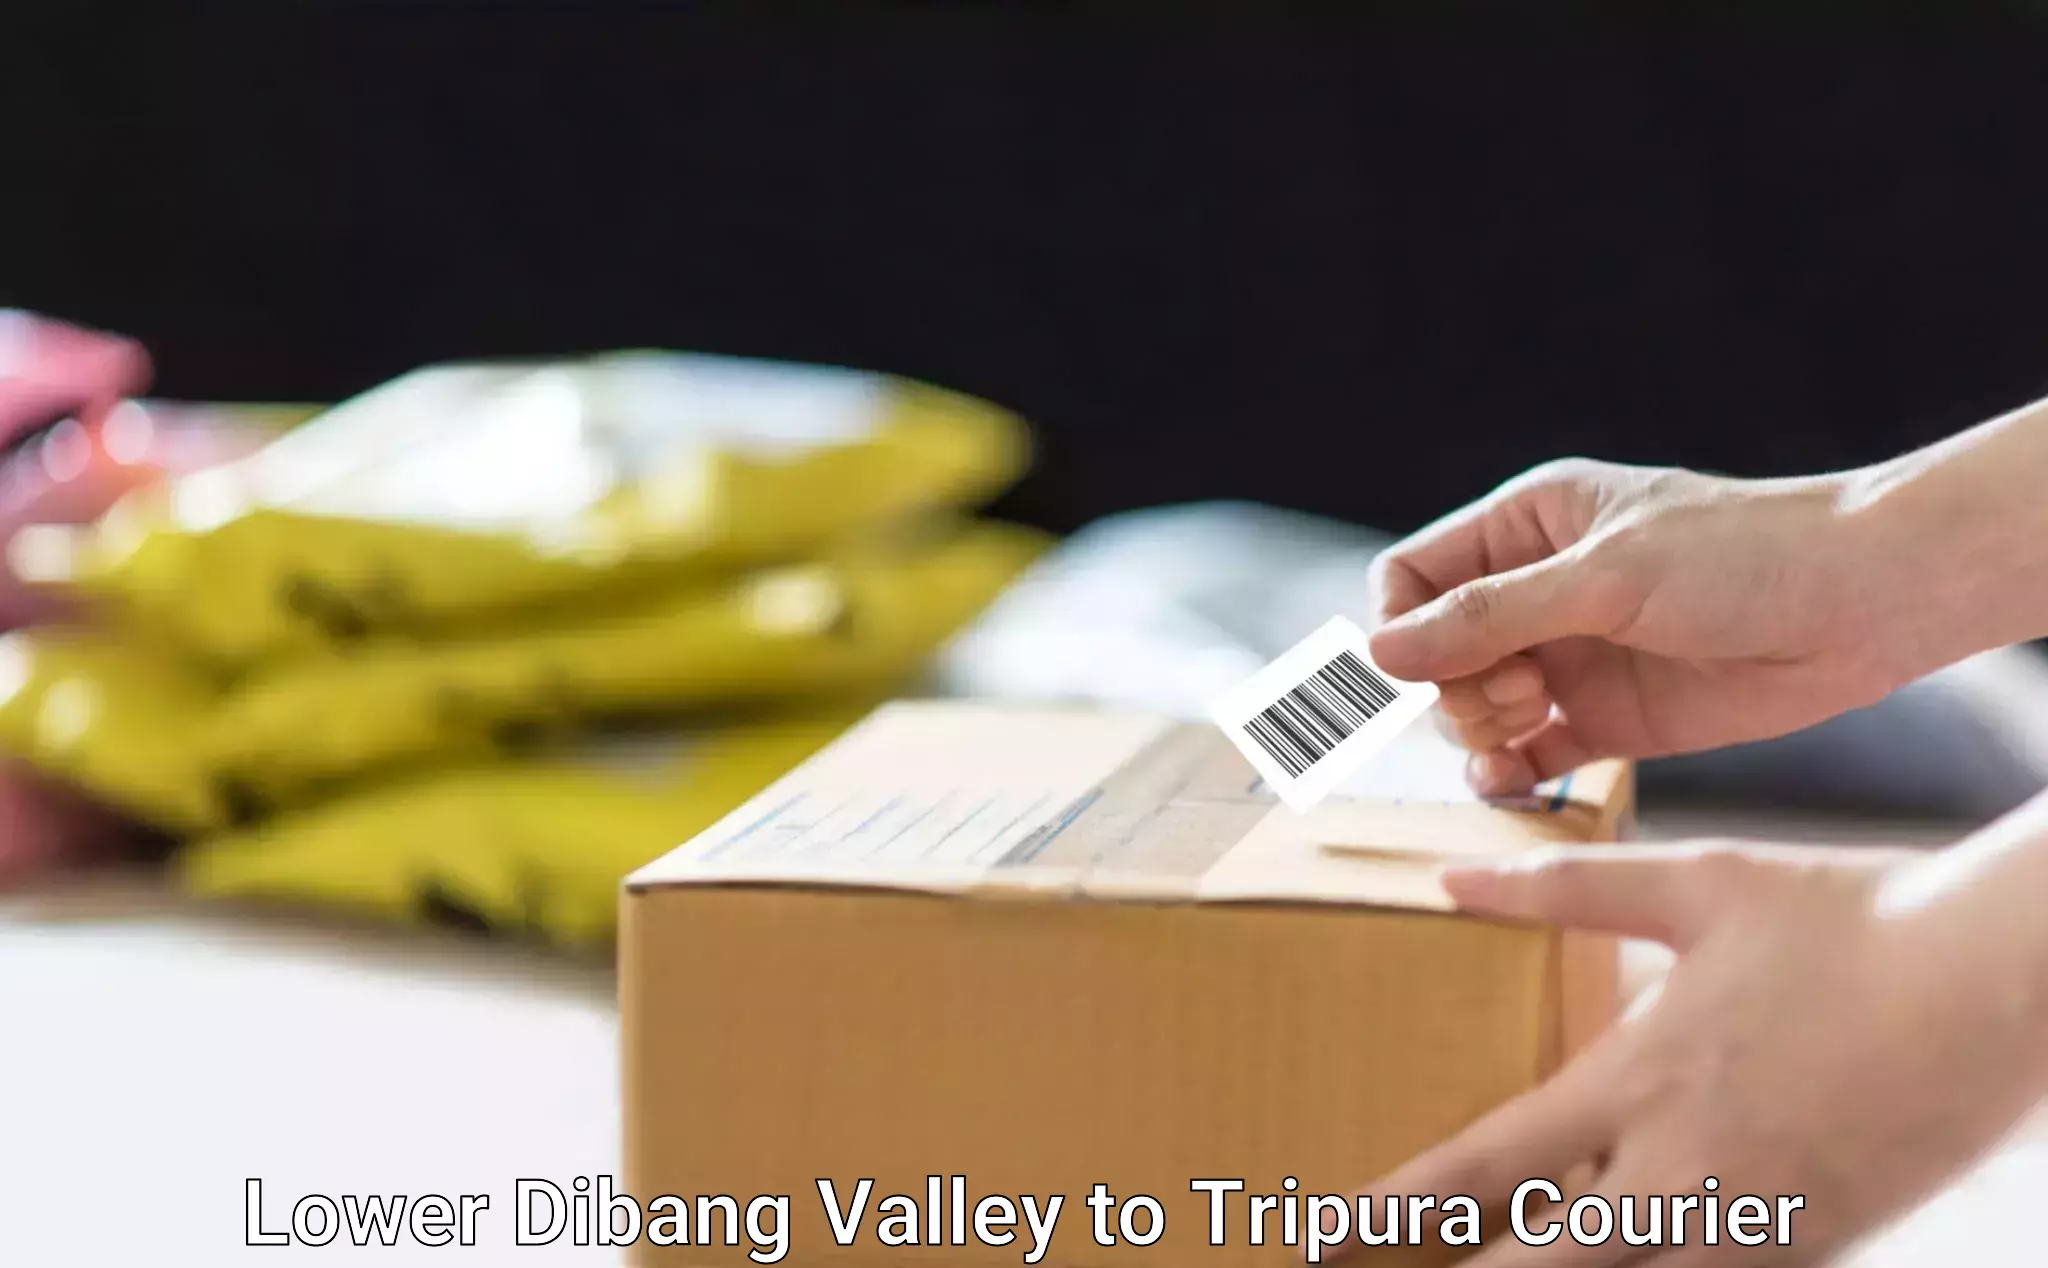 Modern courier technology Lower Dibang Valley to Kailashahar